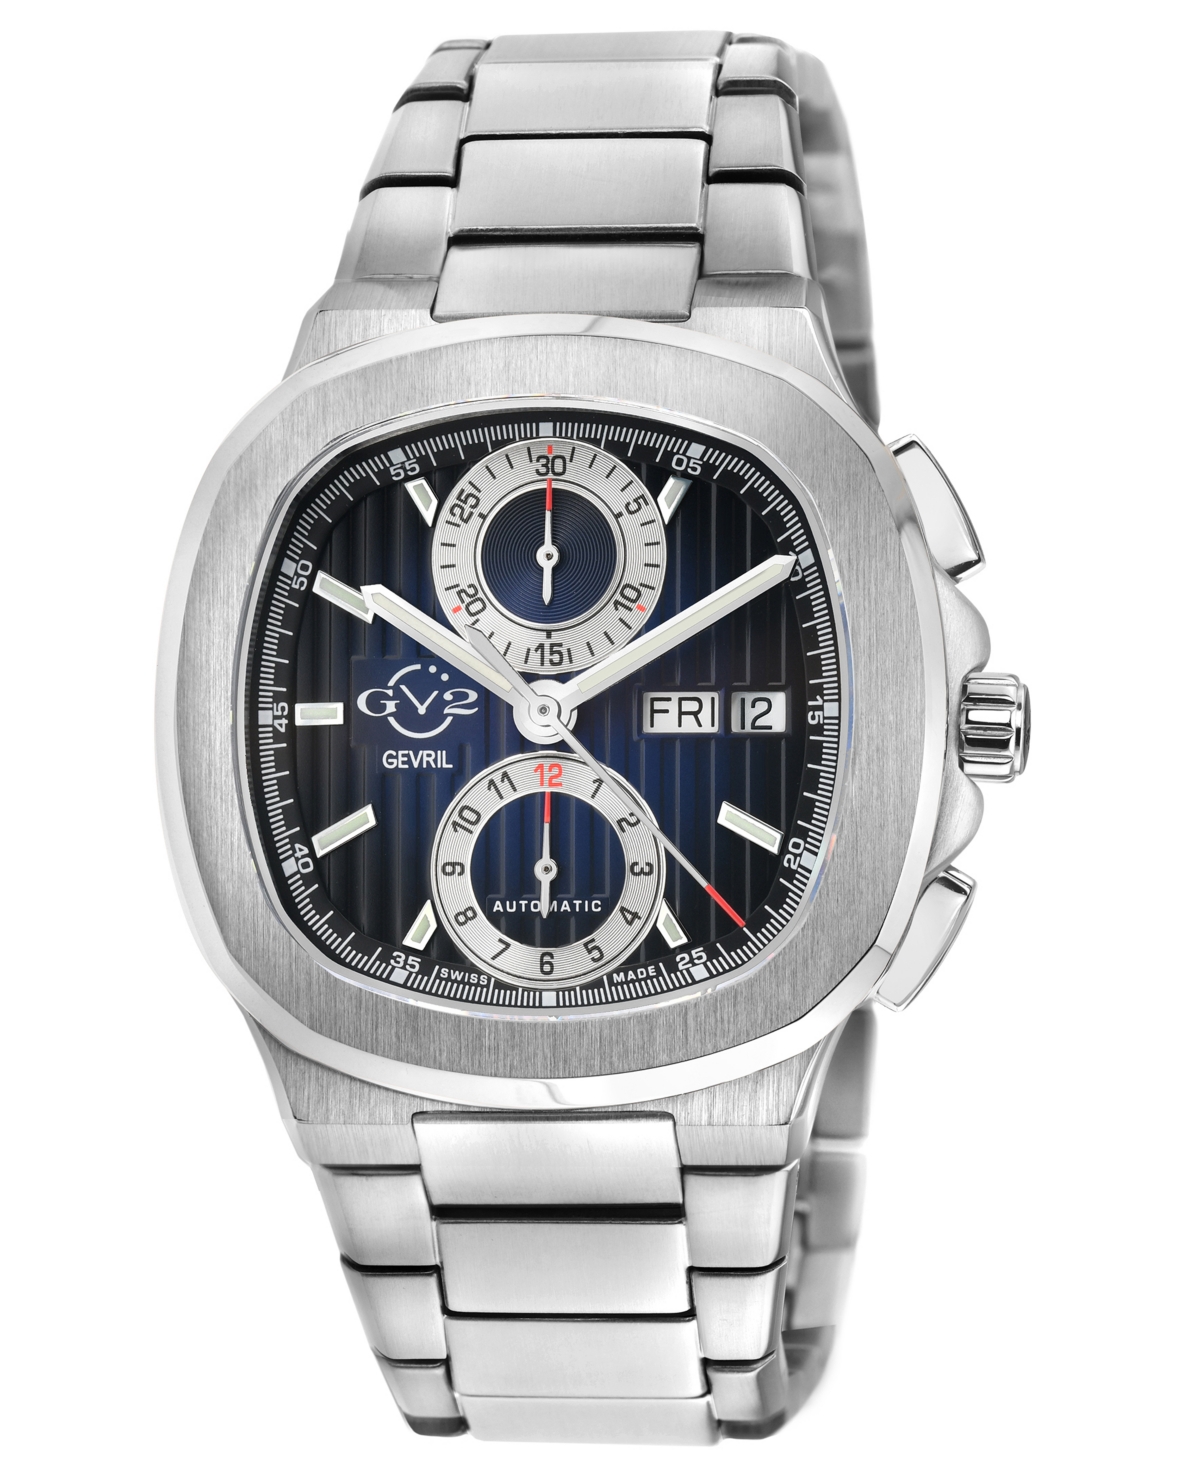 Men's Potente Chronograph Swiss Automatic Silver-Tone Stainless Steel Watch 40mm - Silver